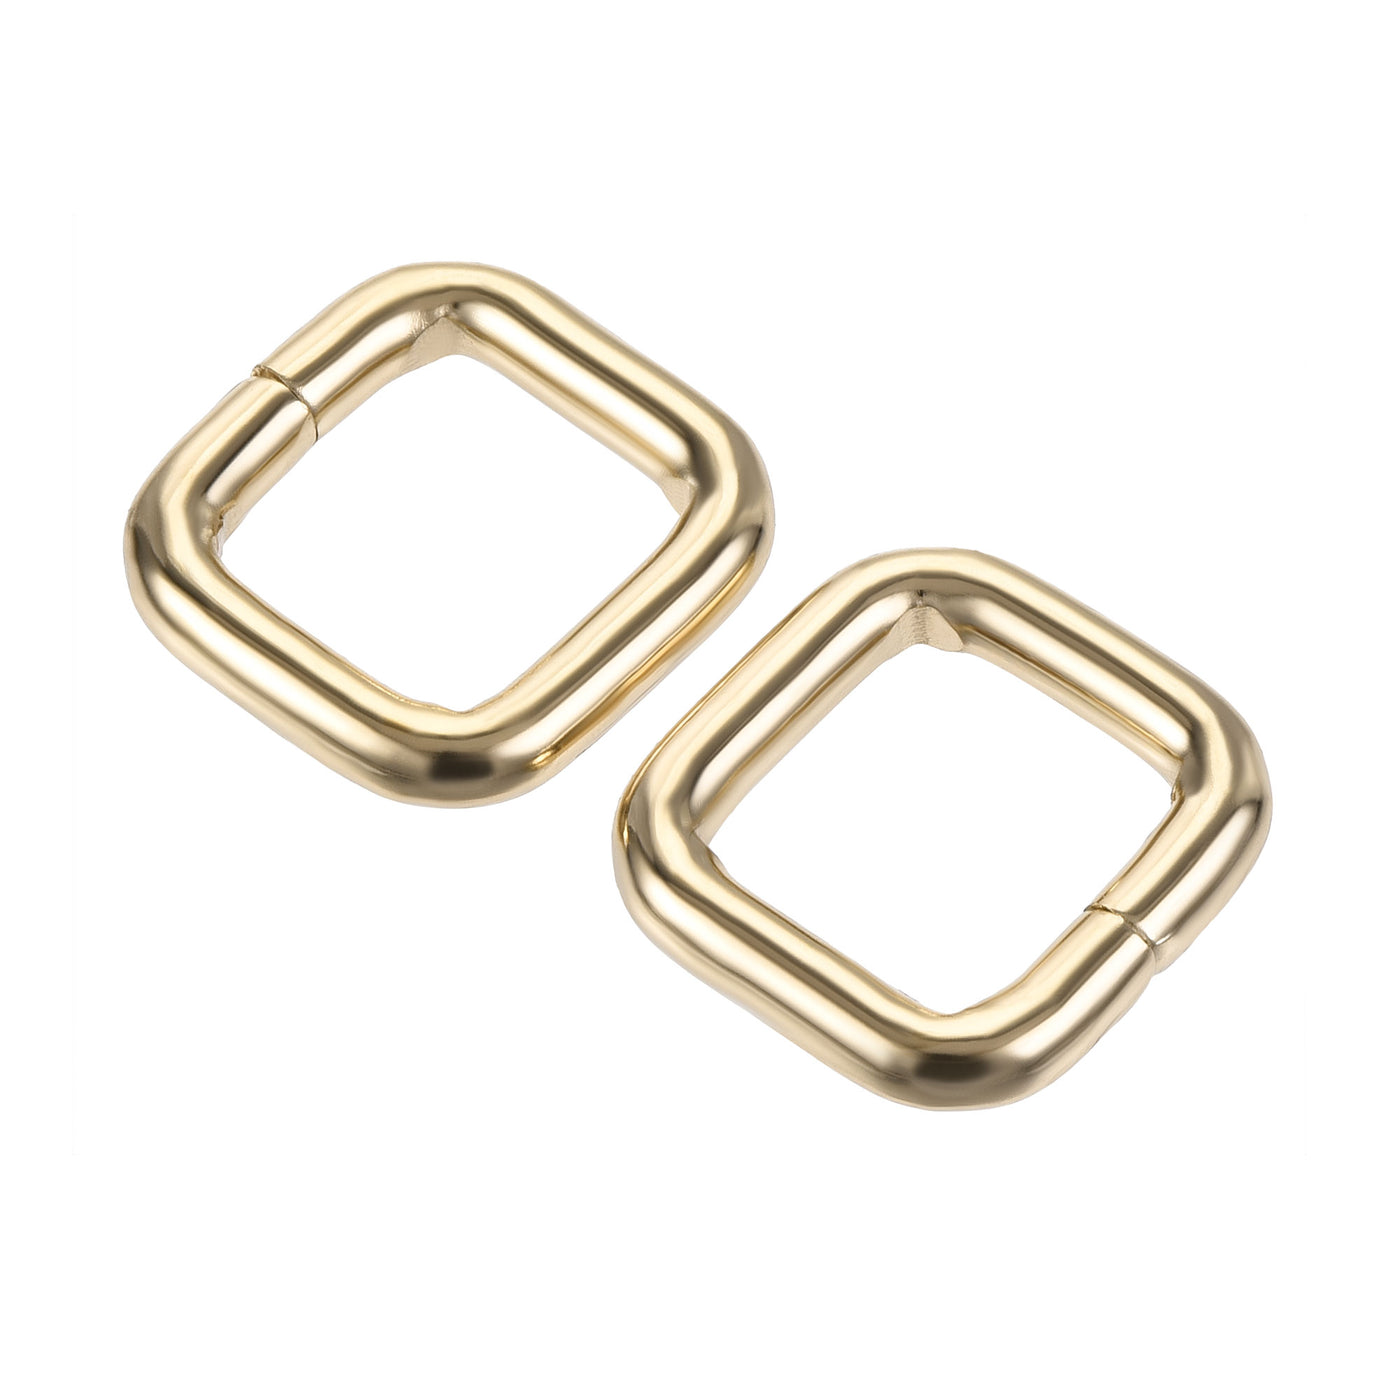 uxcell Uxcell Metal Rectangle Ring Buckles 16x15mm for Bags Belts DIY Gold Tone 10pcs